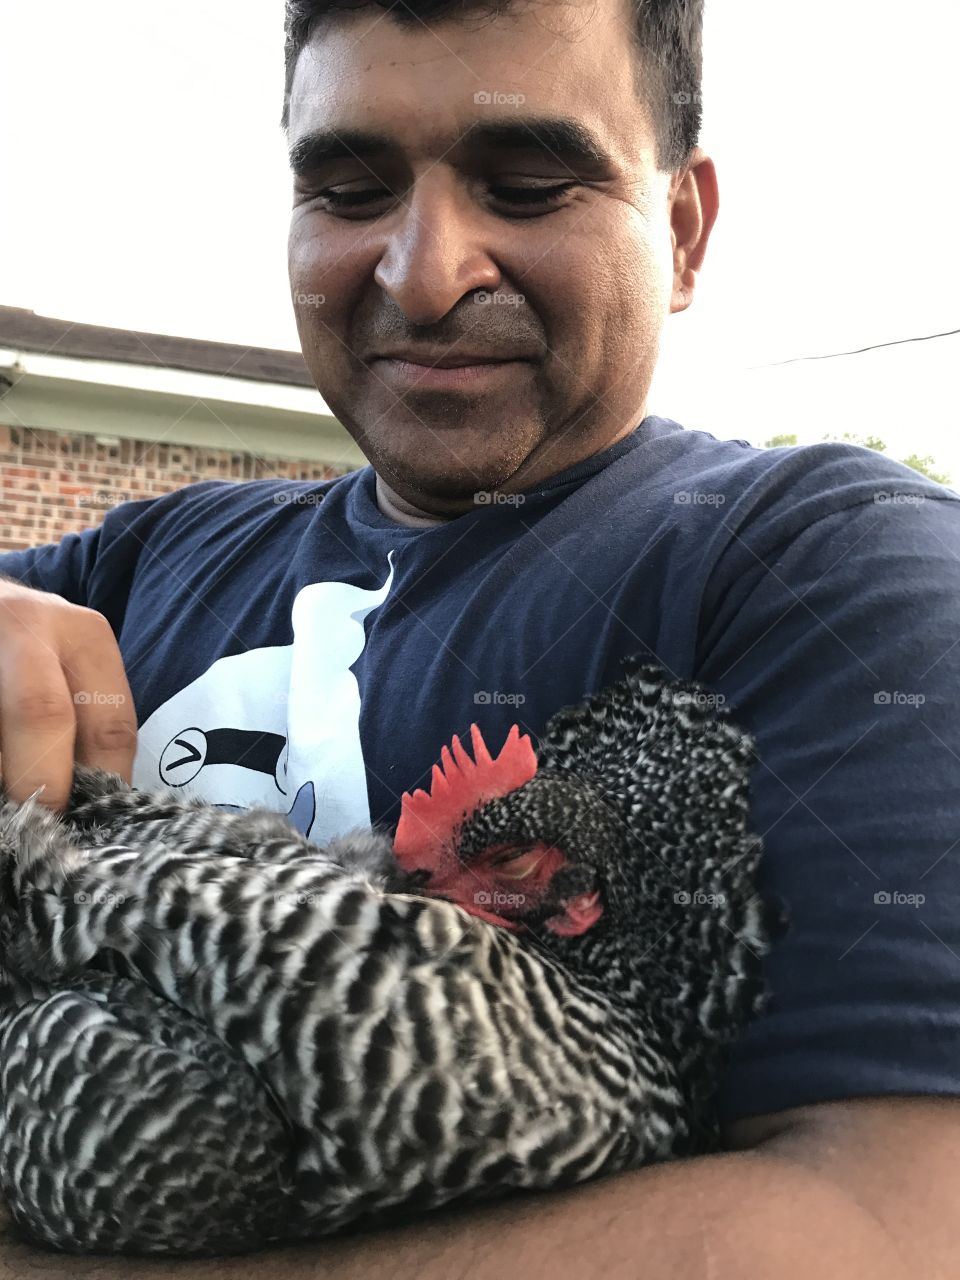 It works on big chickens too!